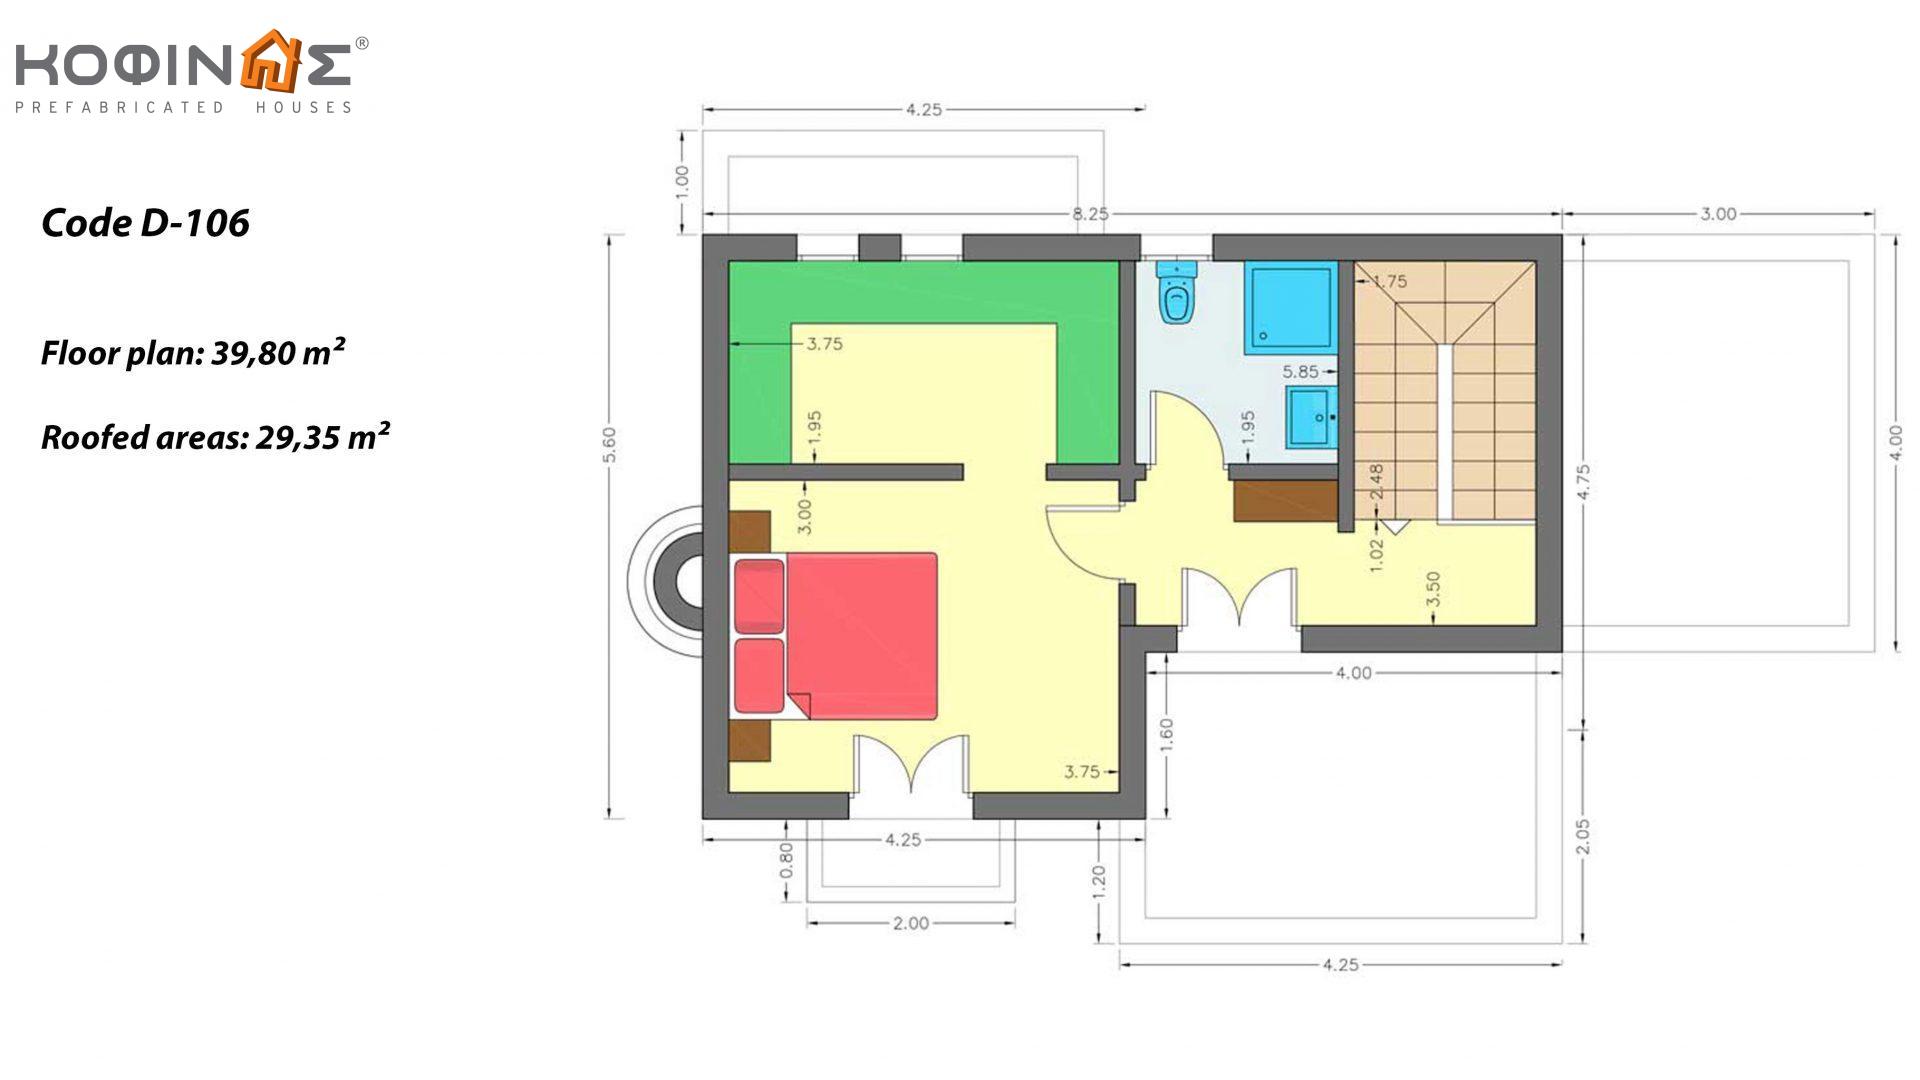 2-story house D-106, total surface of 106,95 m²,covered roofed areas 15.75 m²,balconies 29.35 m²